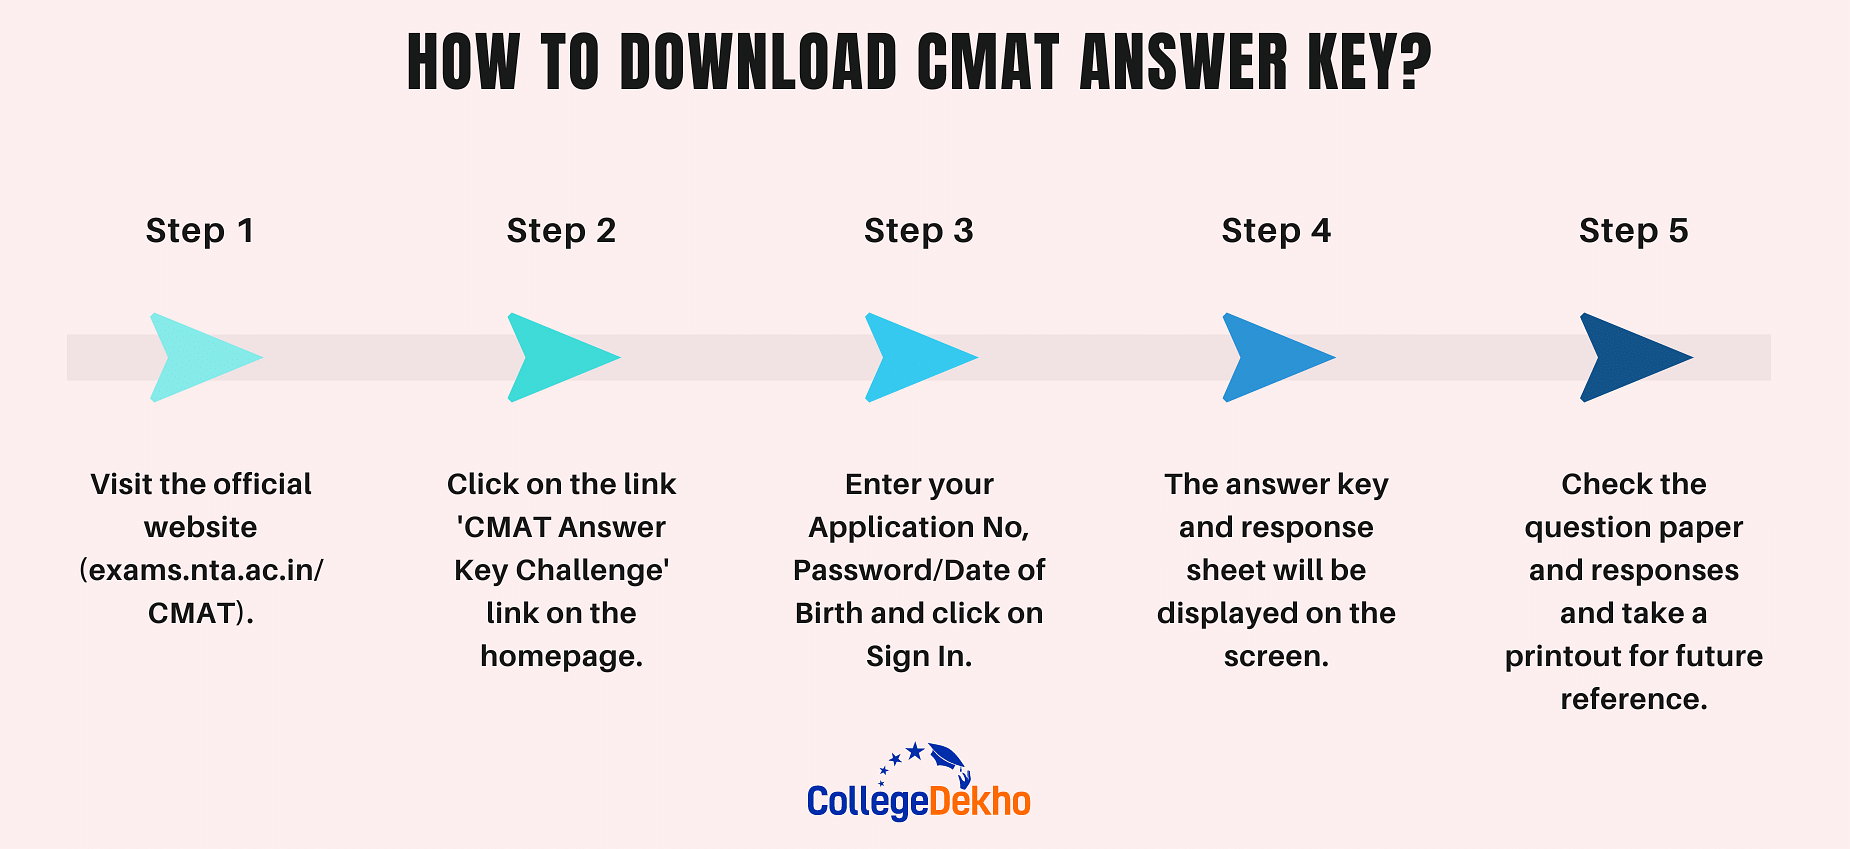 How to Download CMAT Answer Key